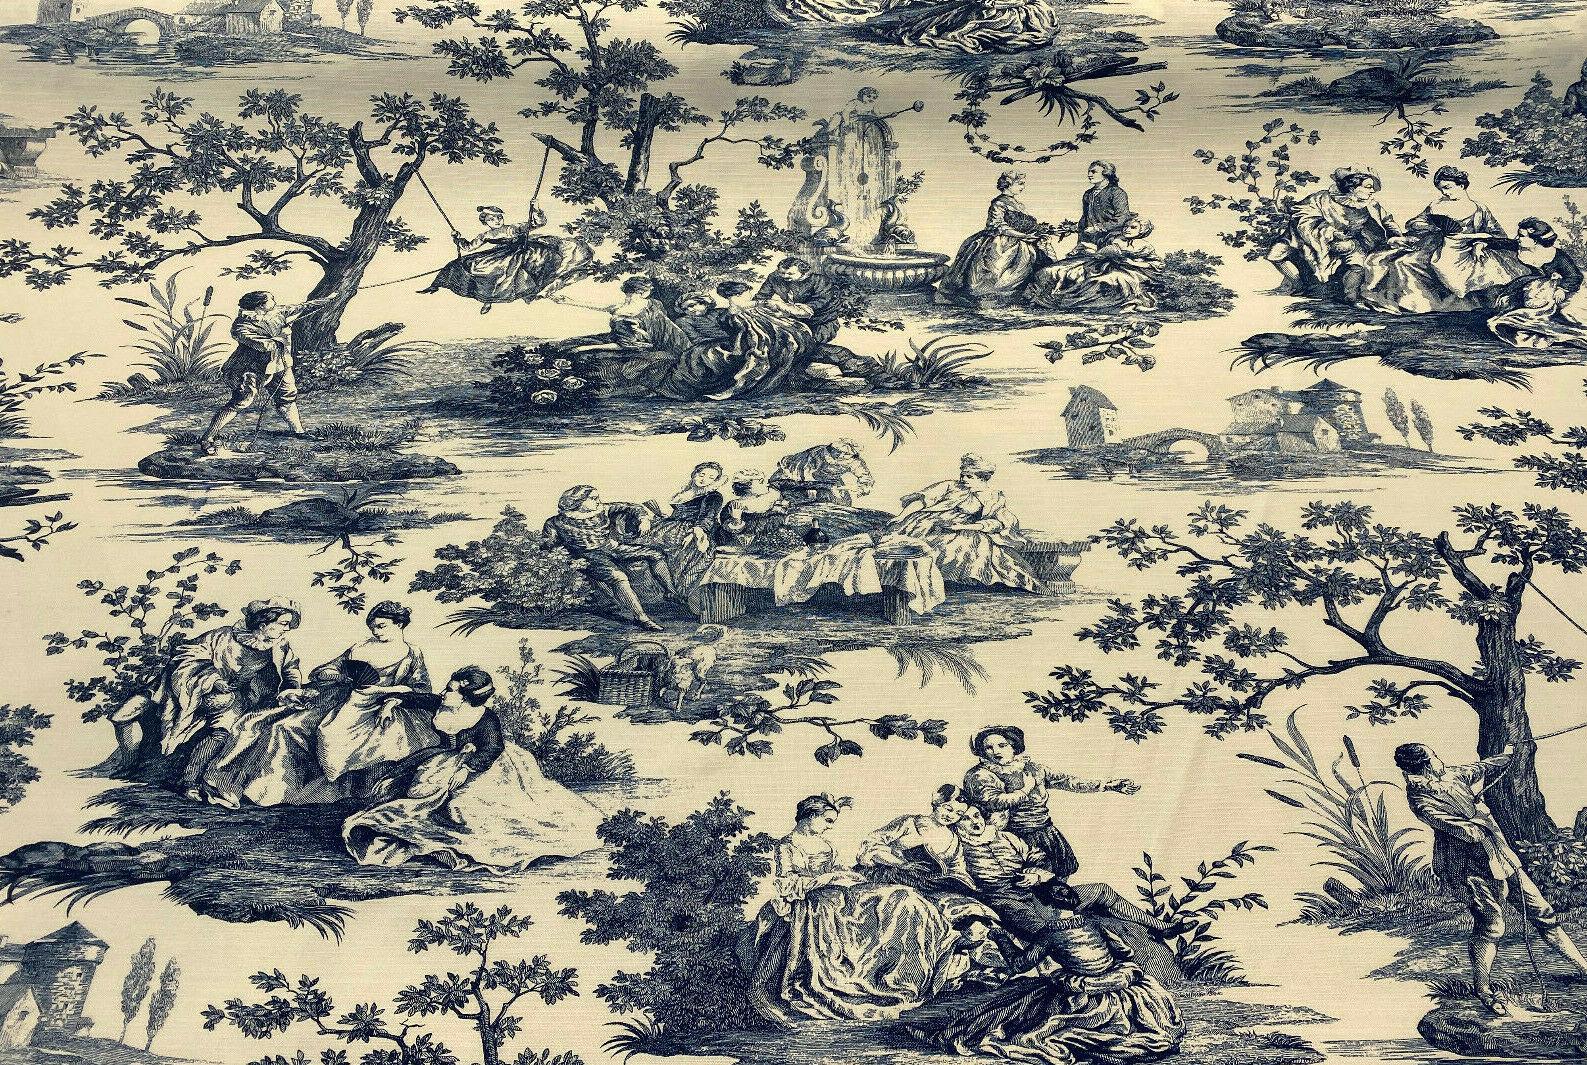 Waverly Black and White Toile Print Fabric